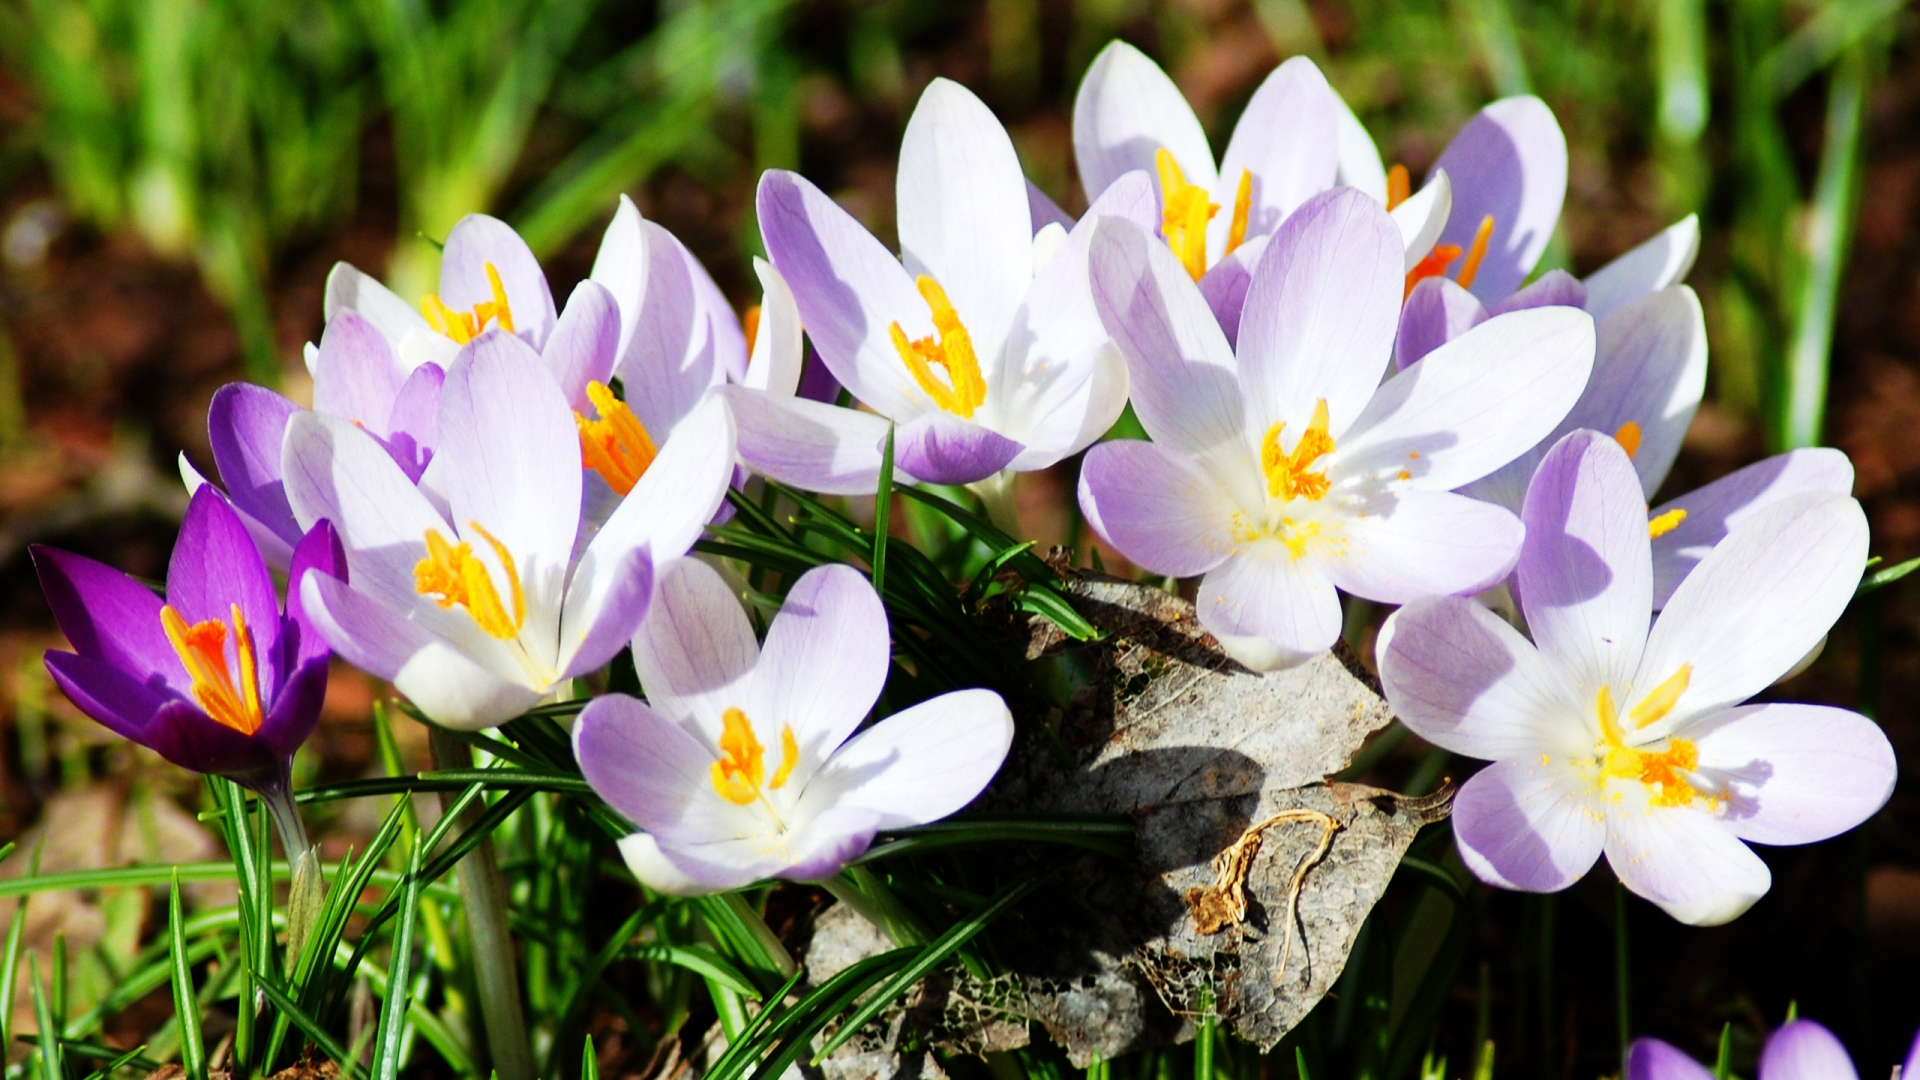 New Spring Flowers for 1920 x 1080 HDTV 1080p resolution